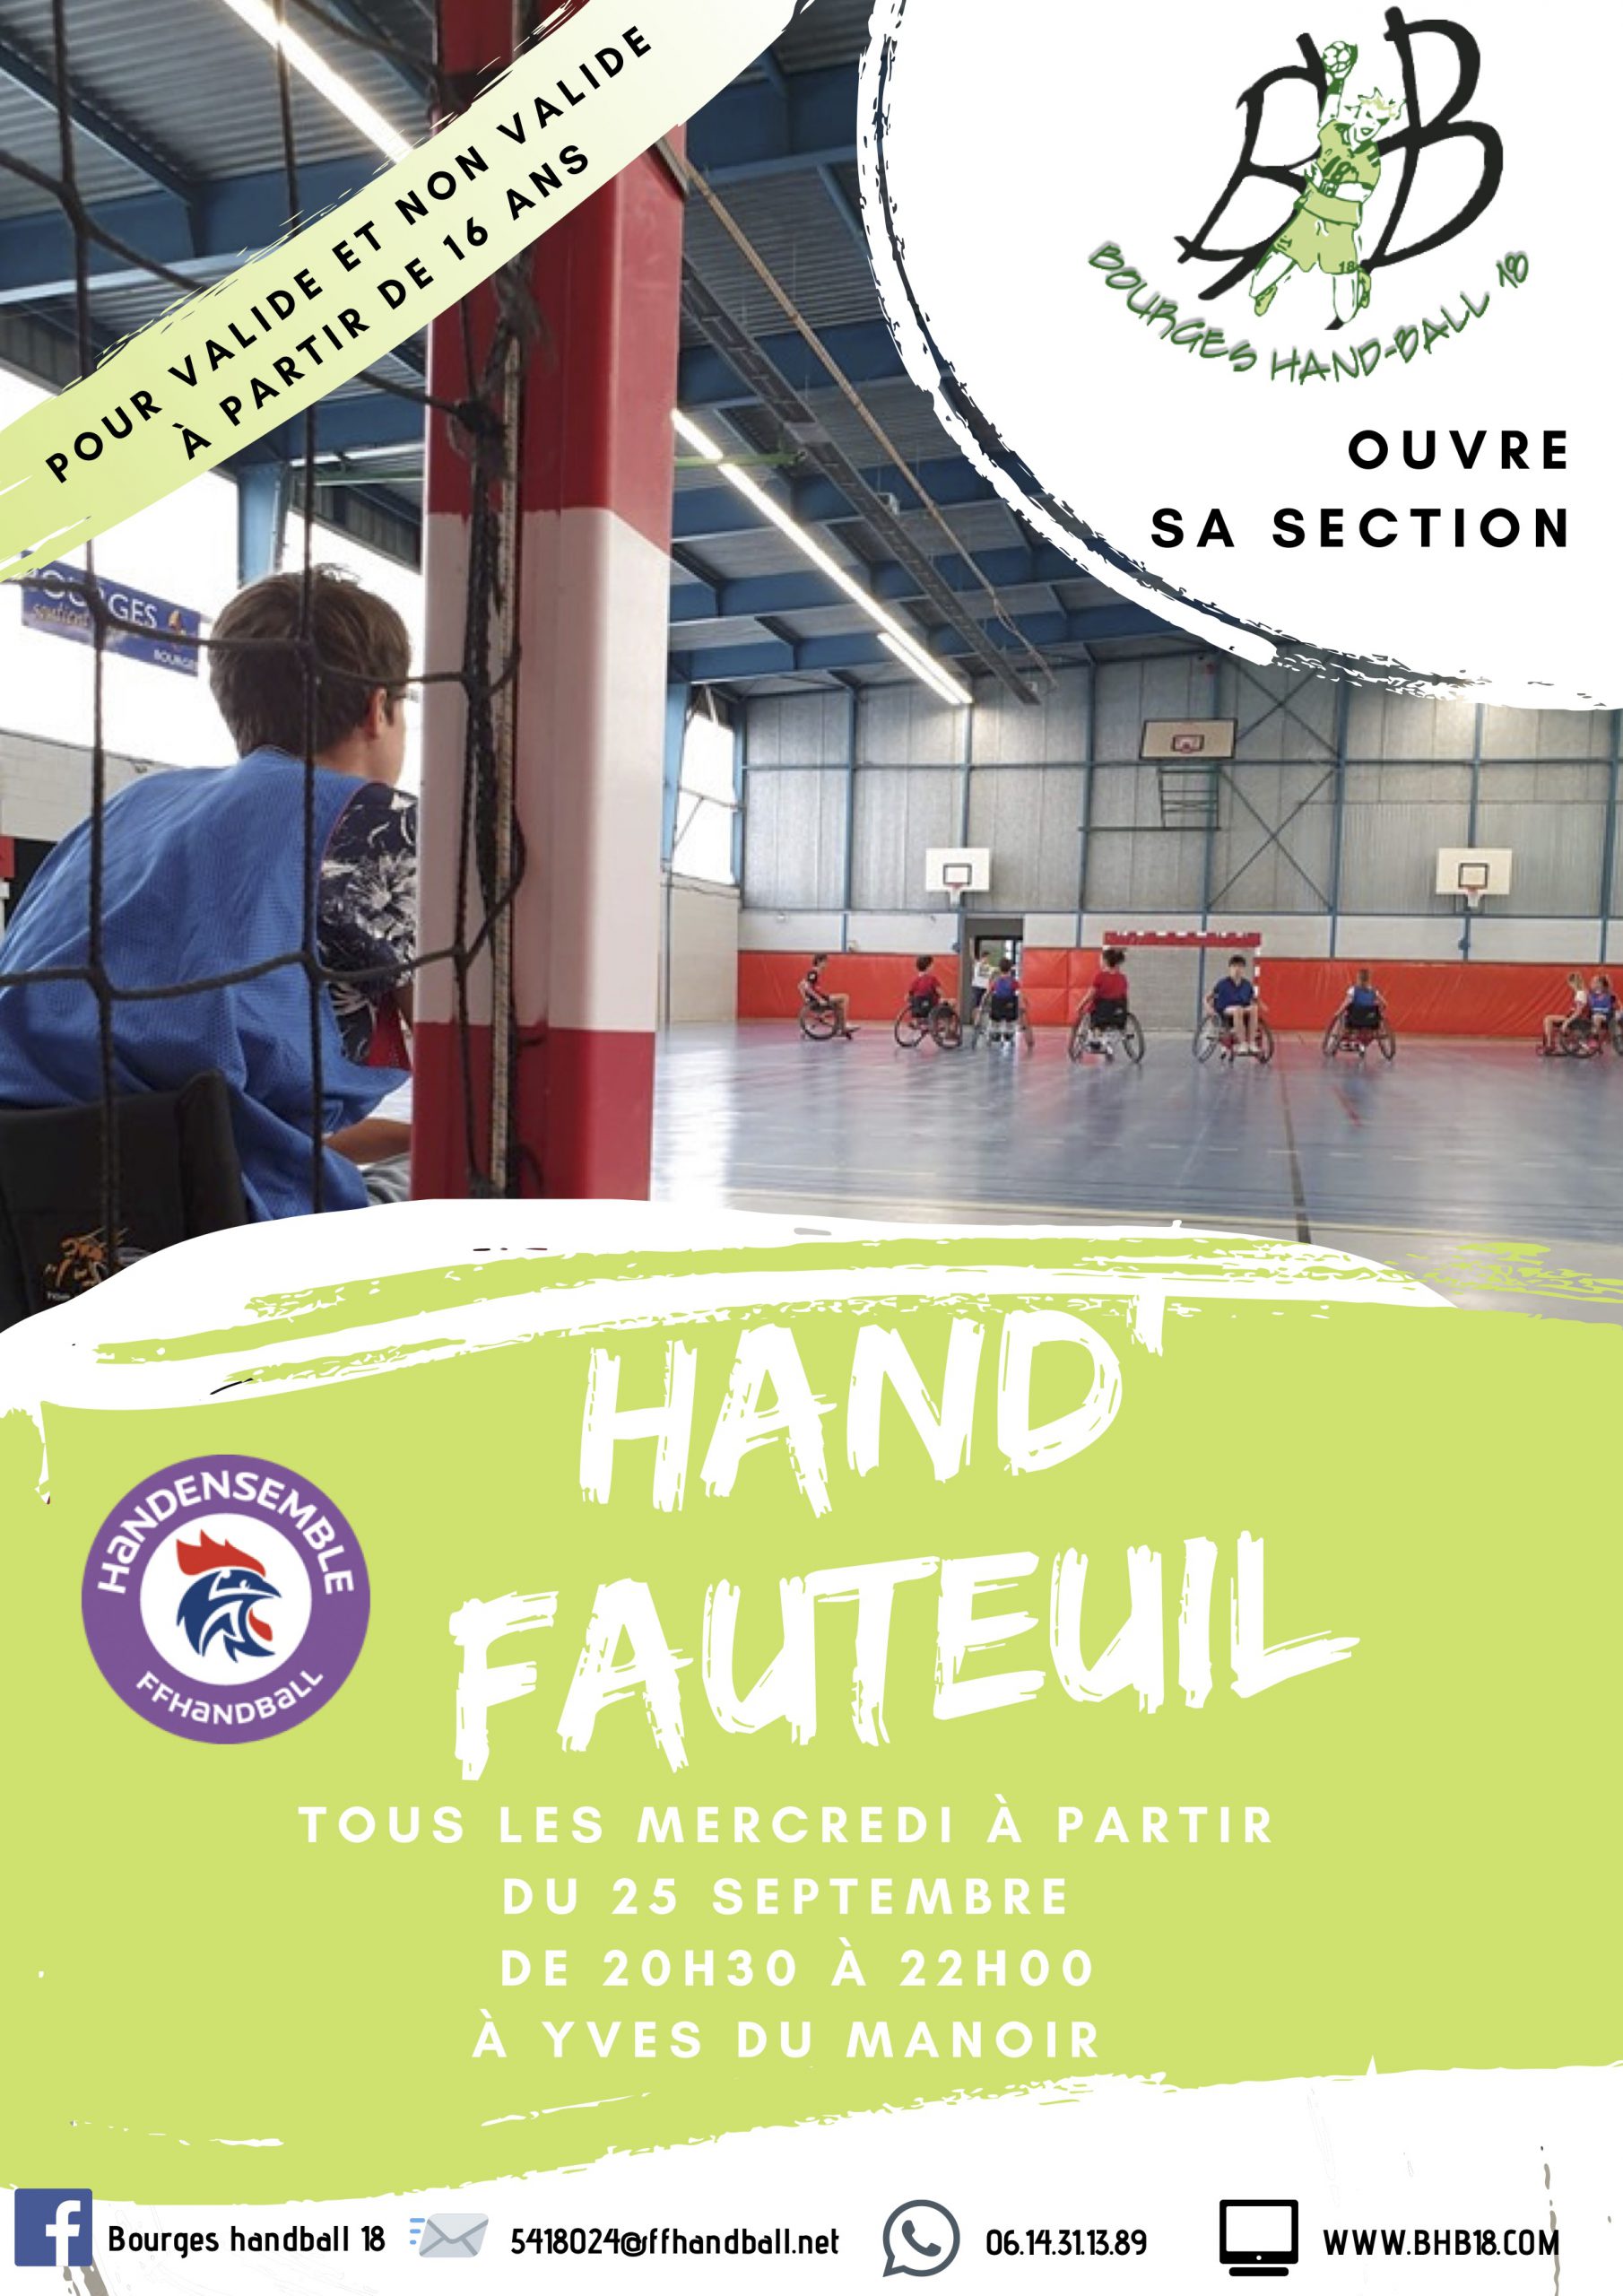 Le BHB 18 ouvre sa section hand’fauteuil